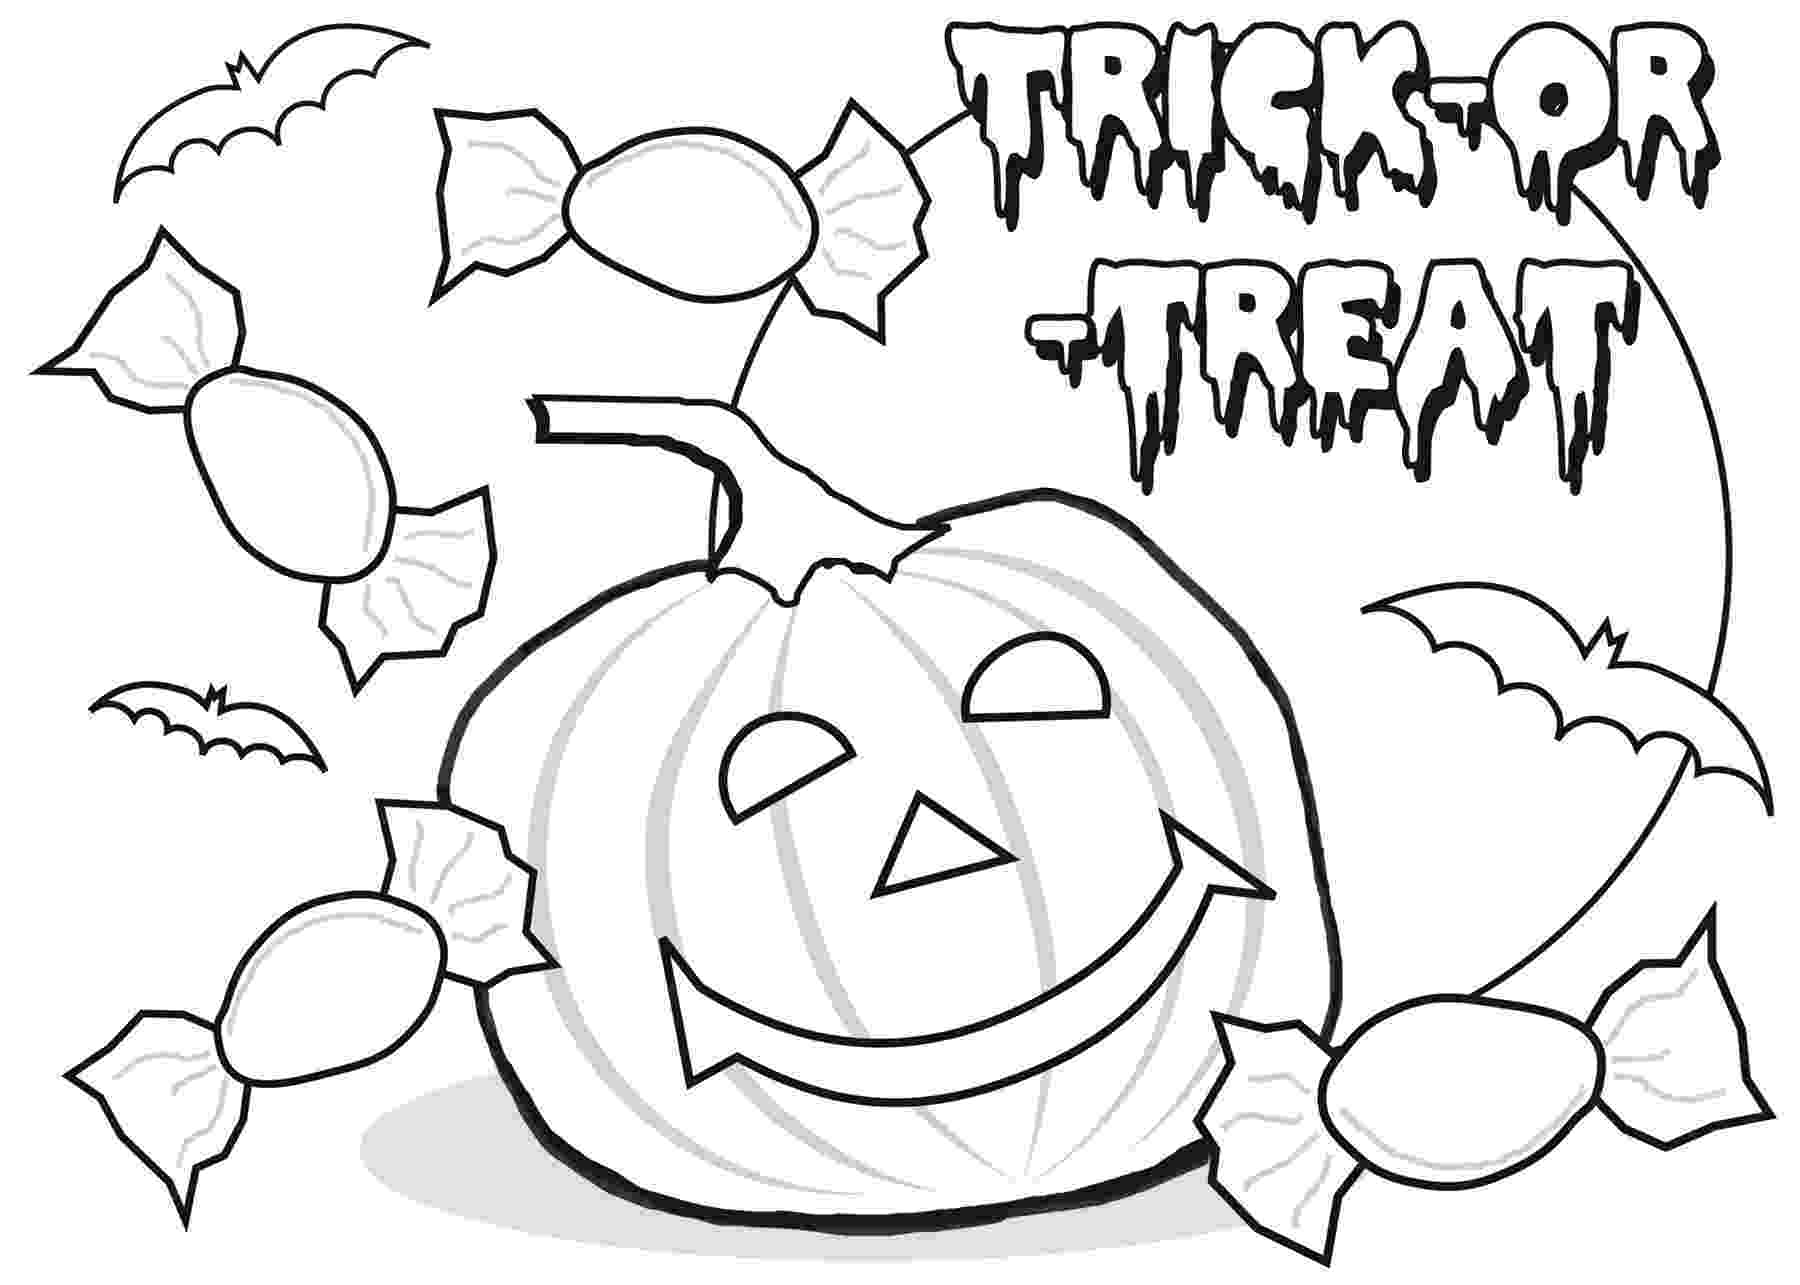 halloween coloring pages to color online hello kitty halloween coloring pages minister coloring halloween to coloring pages online color 